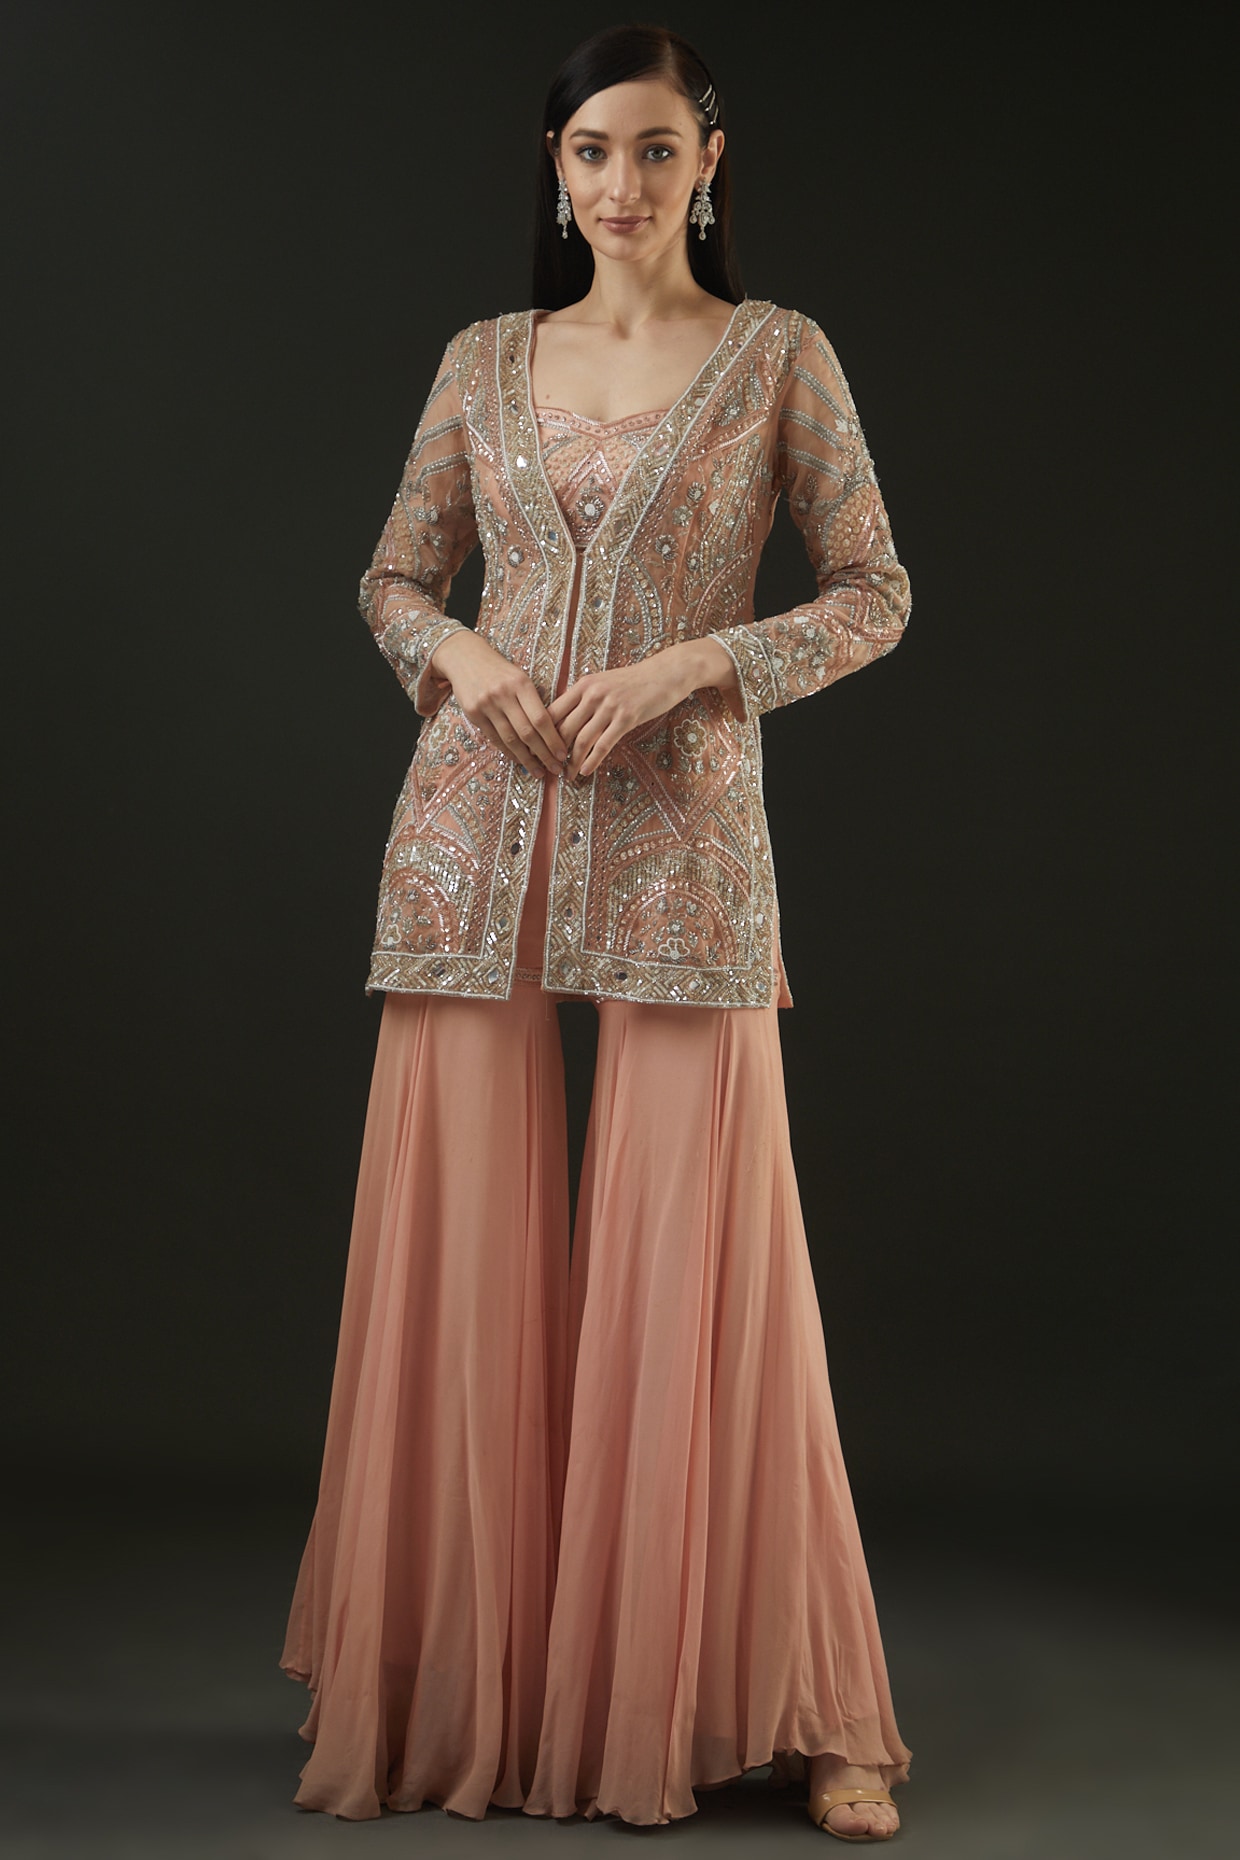 Top 8 Trends And Styles Of Sharara Dress To Up The Glam